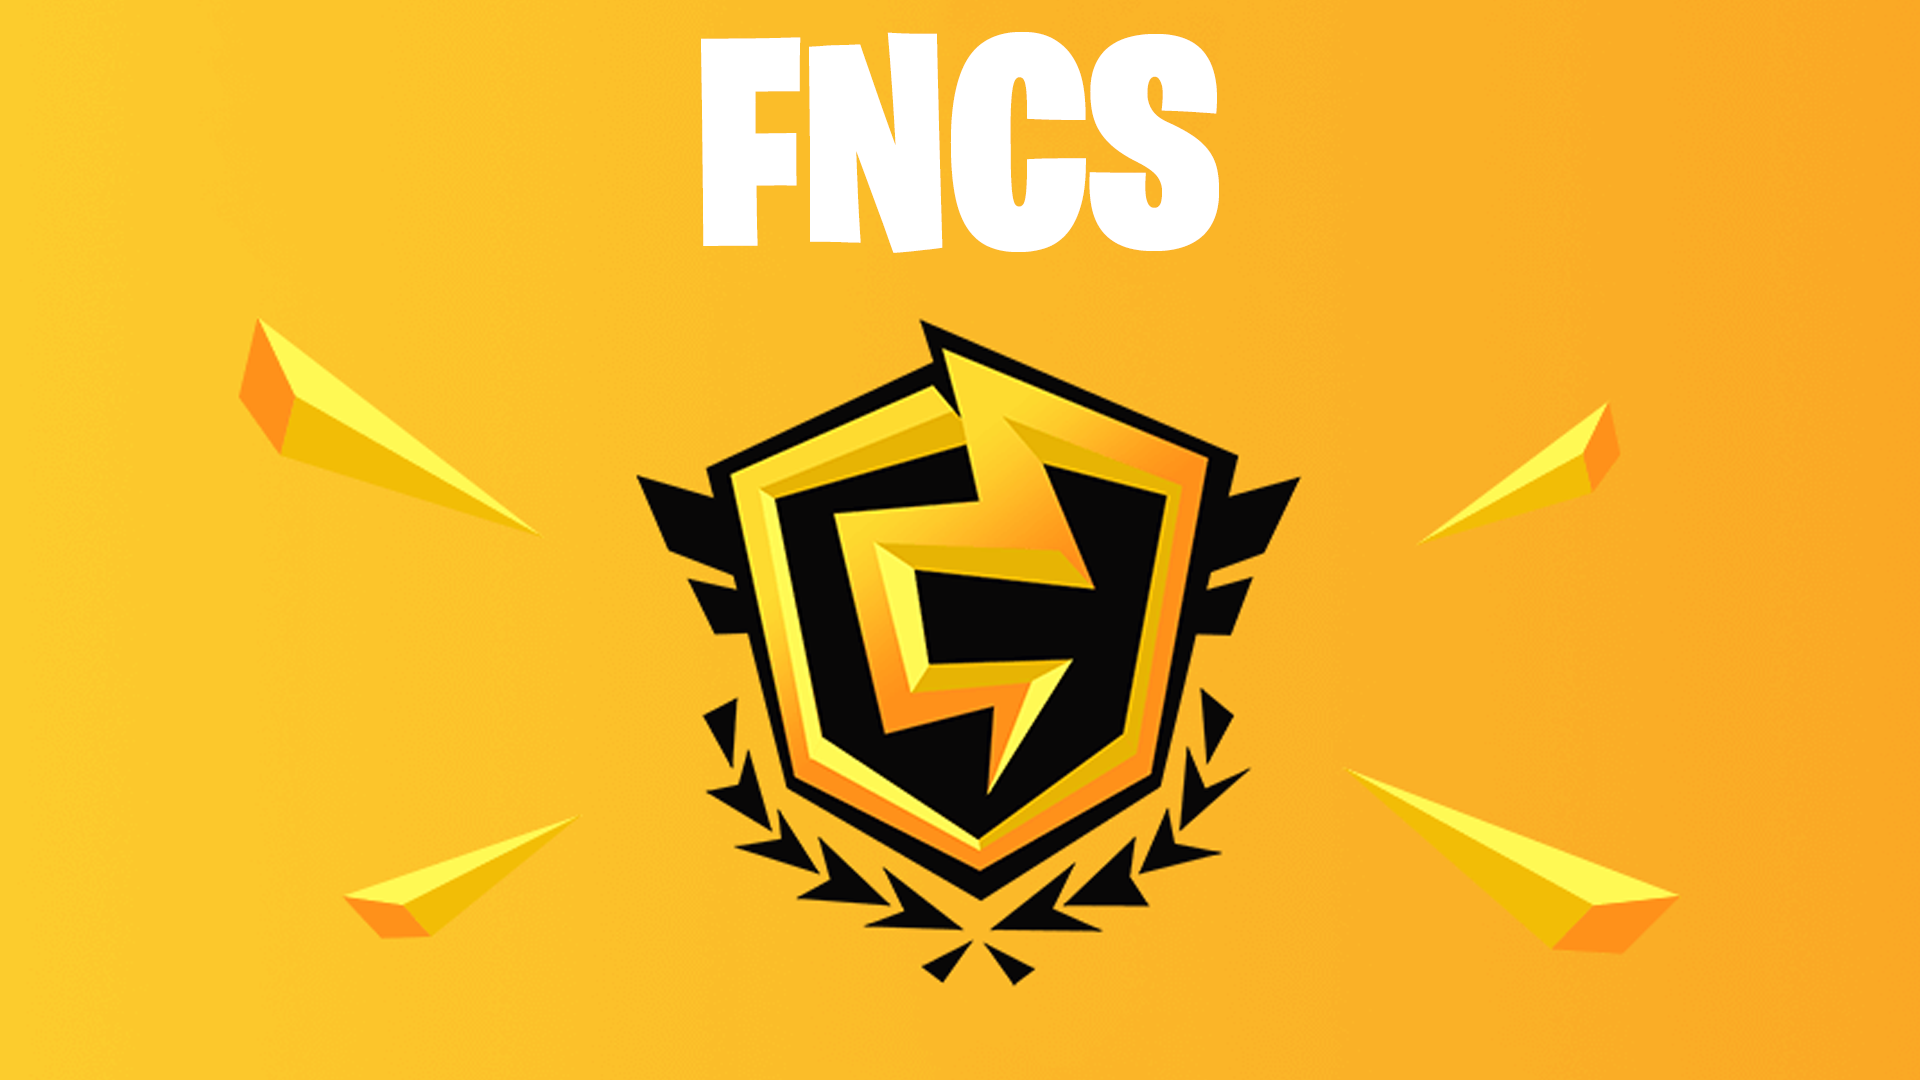 Fortnite Champion Series finals results, prize pool and more from FNCS.